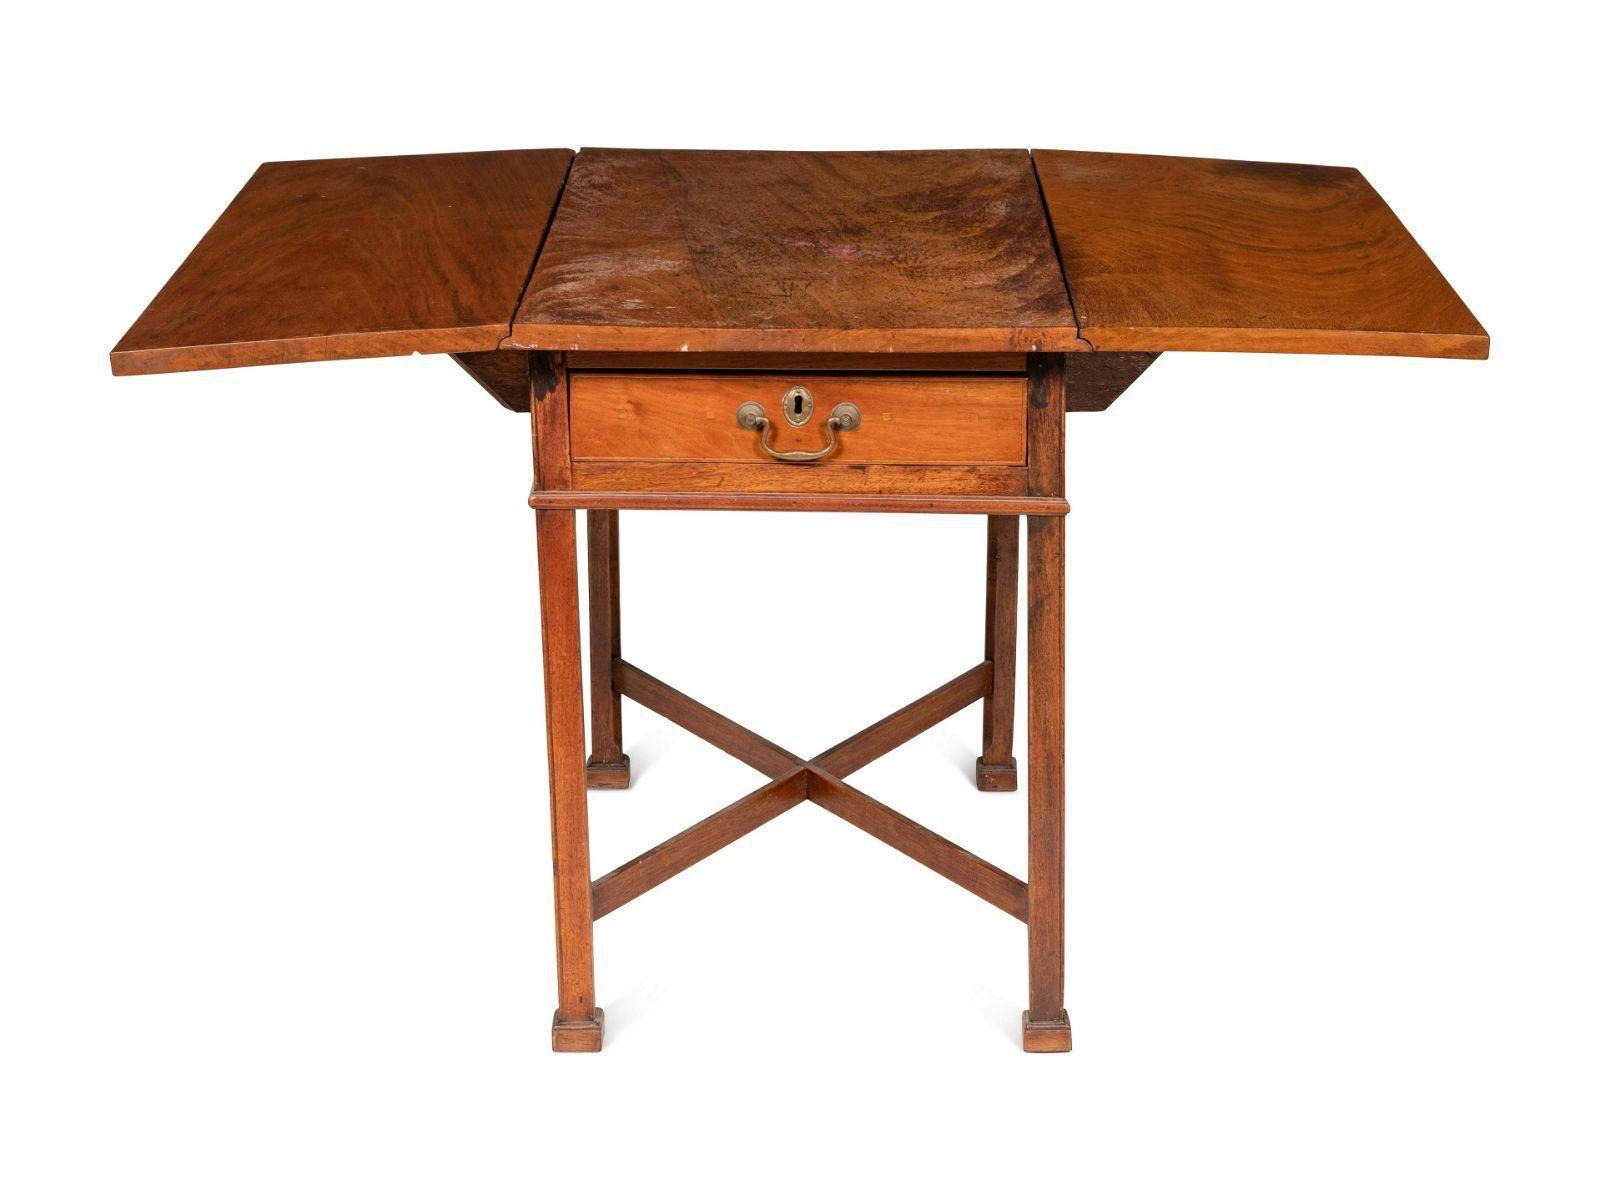 Antique Chippendale Mahogany Stretcher Base Pembroke Table, Late 18th/early 19th Century. Table features a single drawer retaining original fire gilt pull, and cross stretcher characteristic on Pembroke tables.

Dimensions
28 1/2